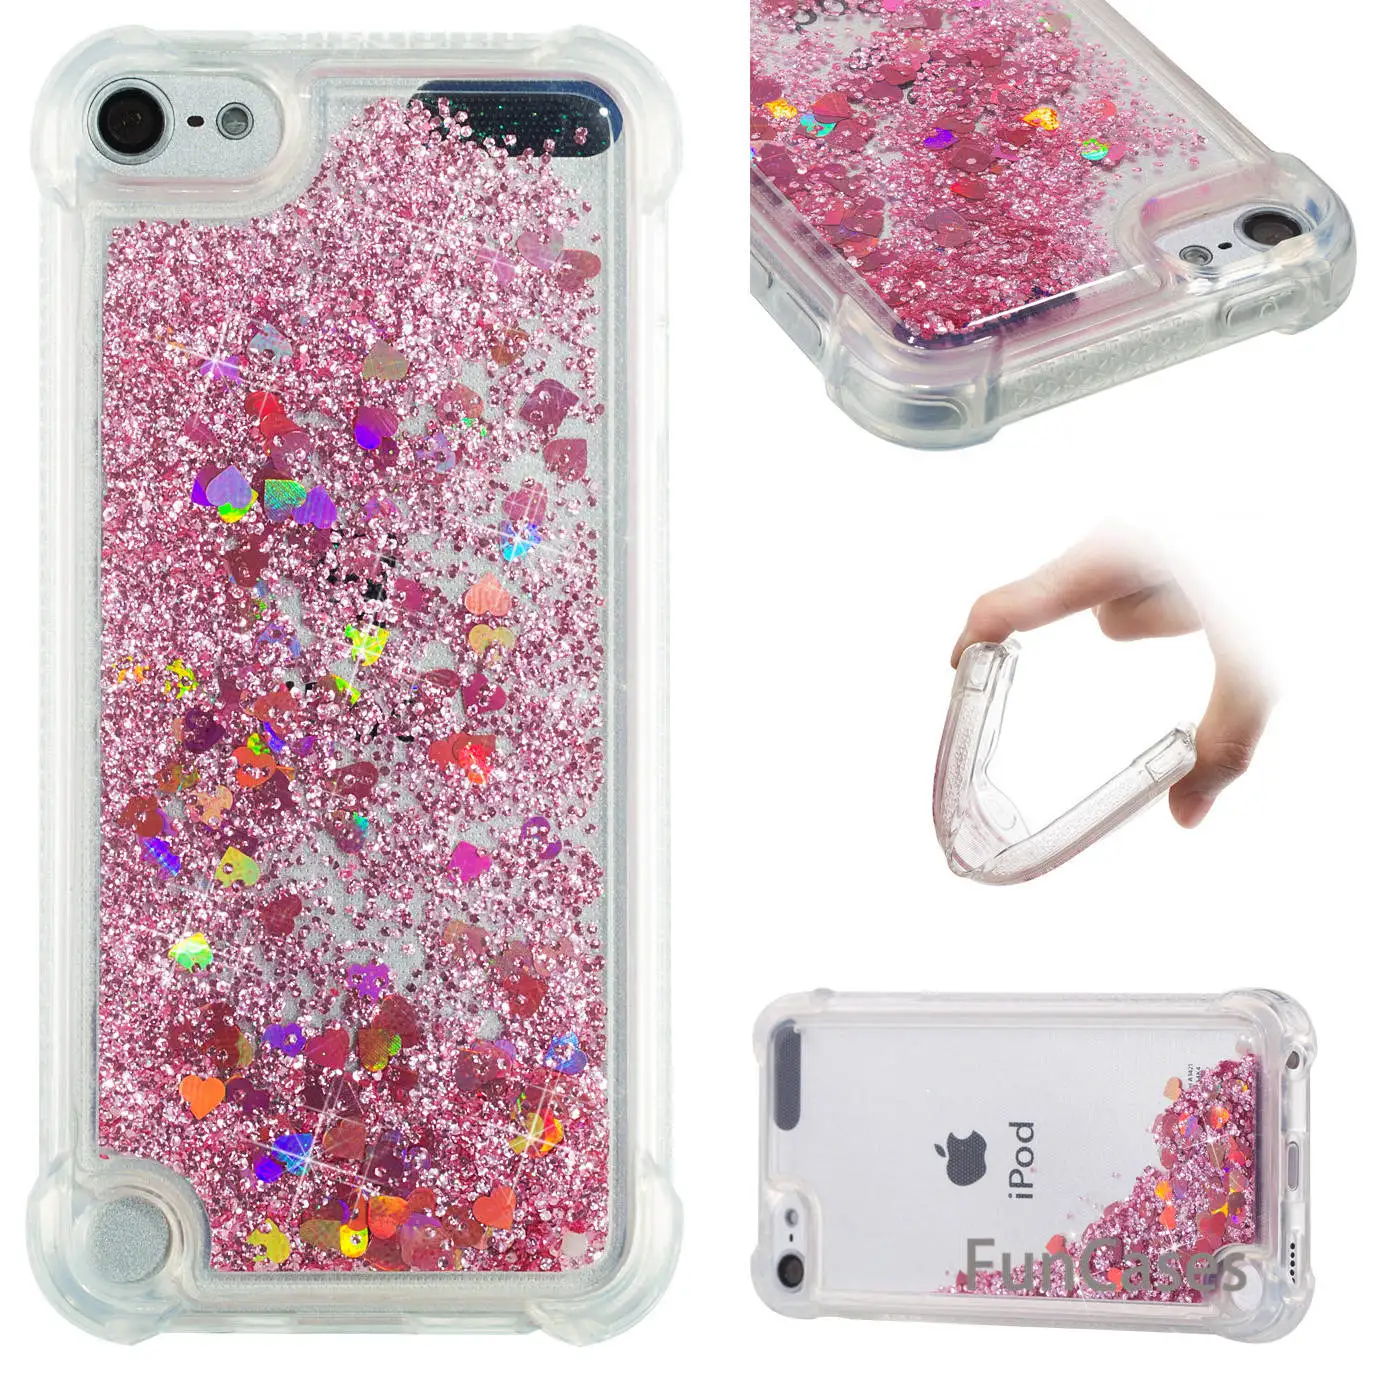 Verdampen afwijzing ontploffing Pink Star Case sFor Hoesje iPhone Touch 5 Soft Silicone Back Cover Carcasa  Jewelled Fitted Case sFor iPhone iPod Touch 6 Casca - AliExpress Cellphones  & Telecommunications